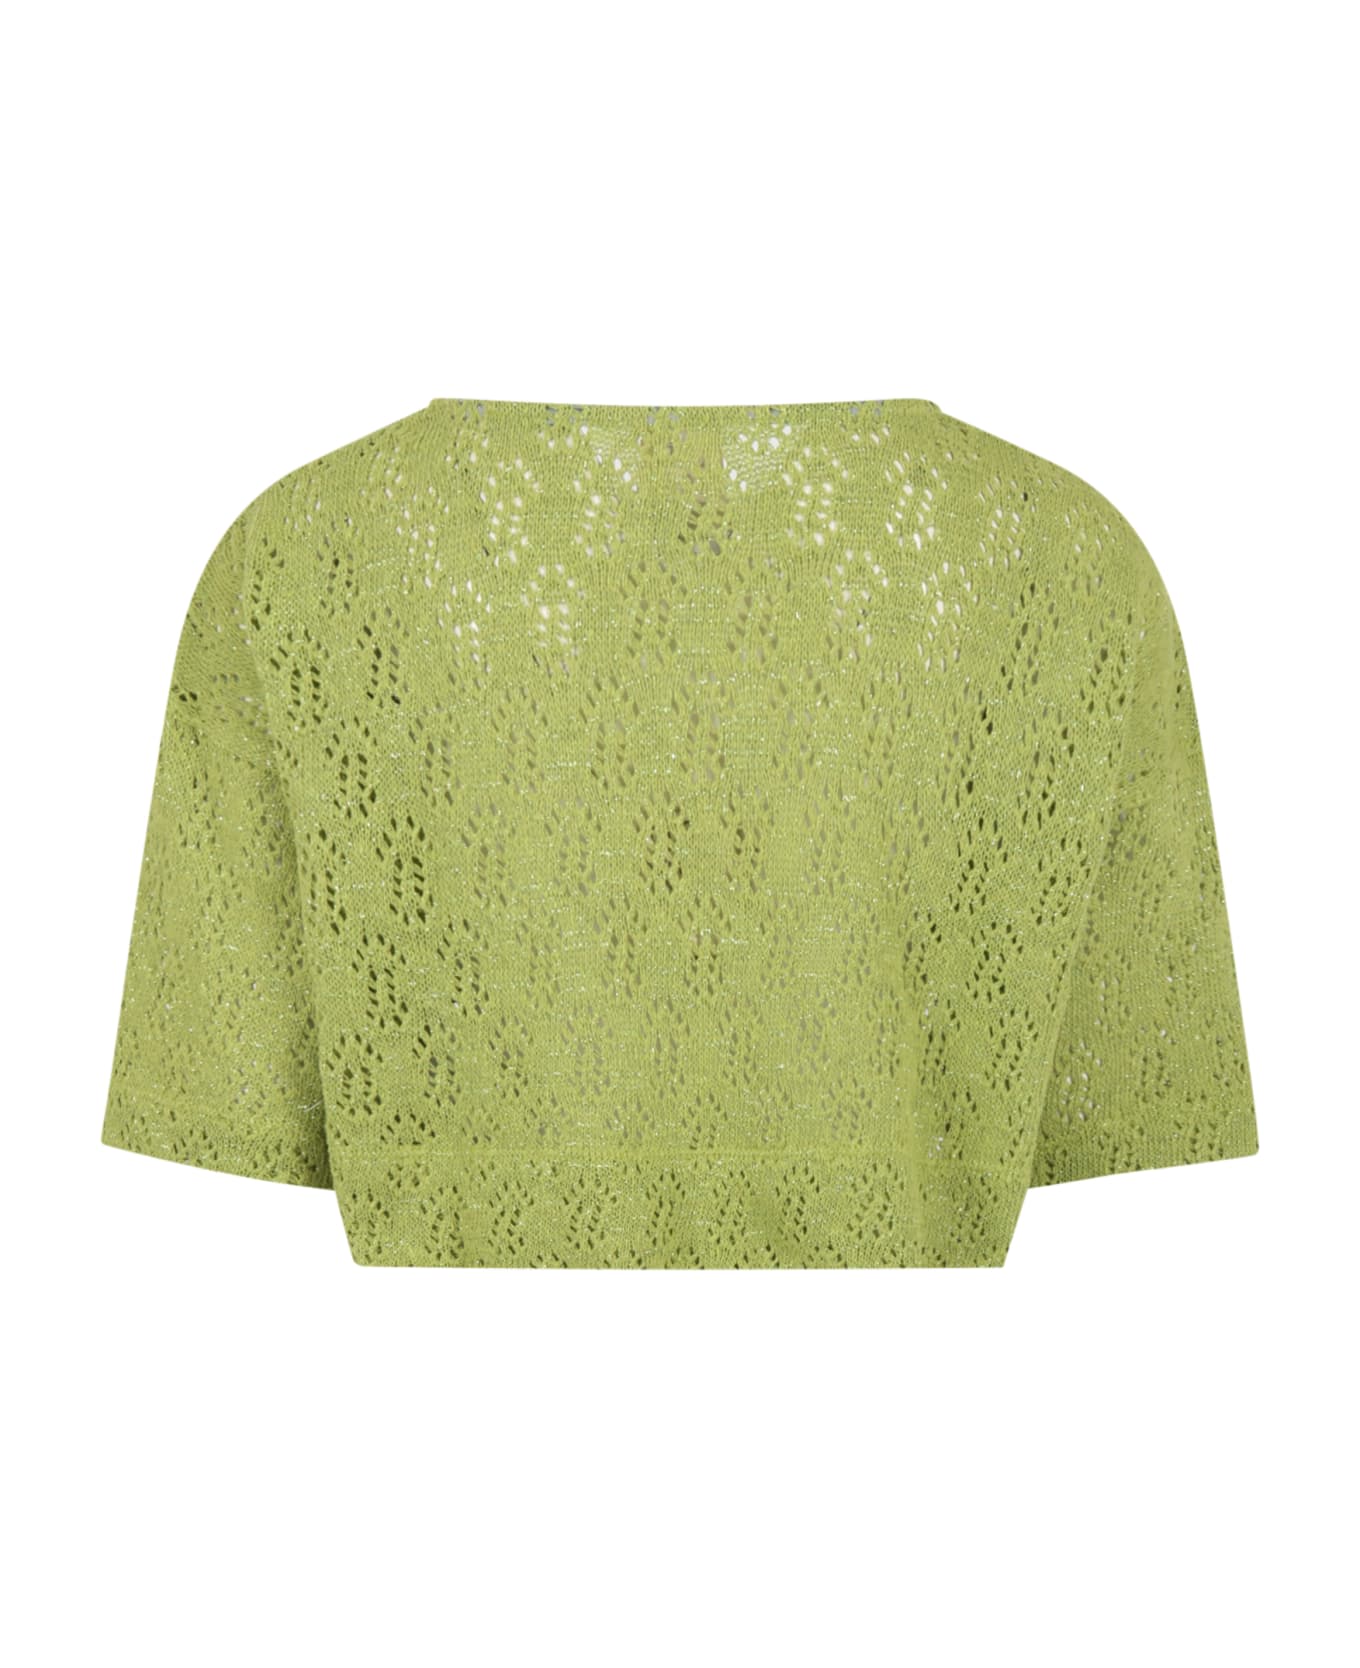 Caffe' d'Orzo Green Sweater For Girl With Lurex Details - Green